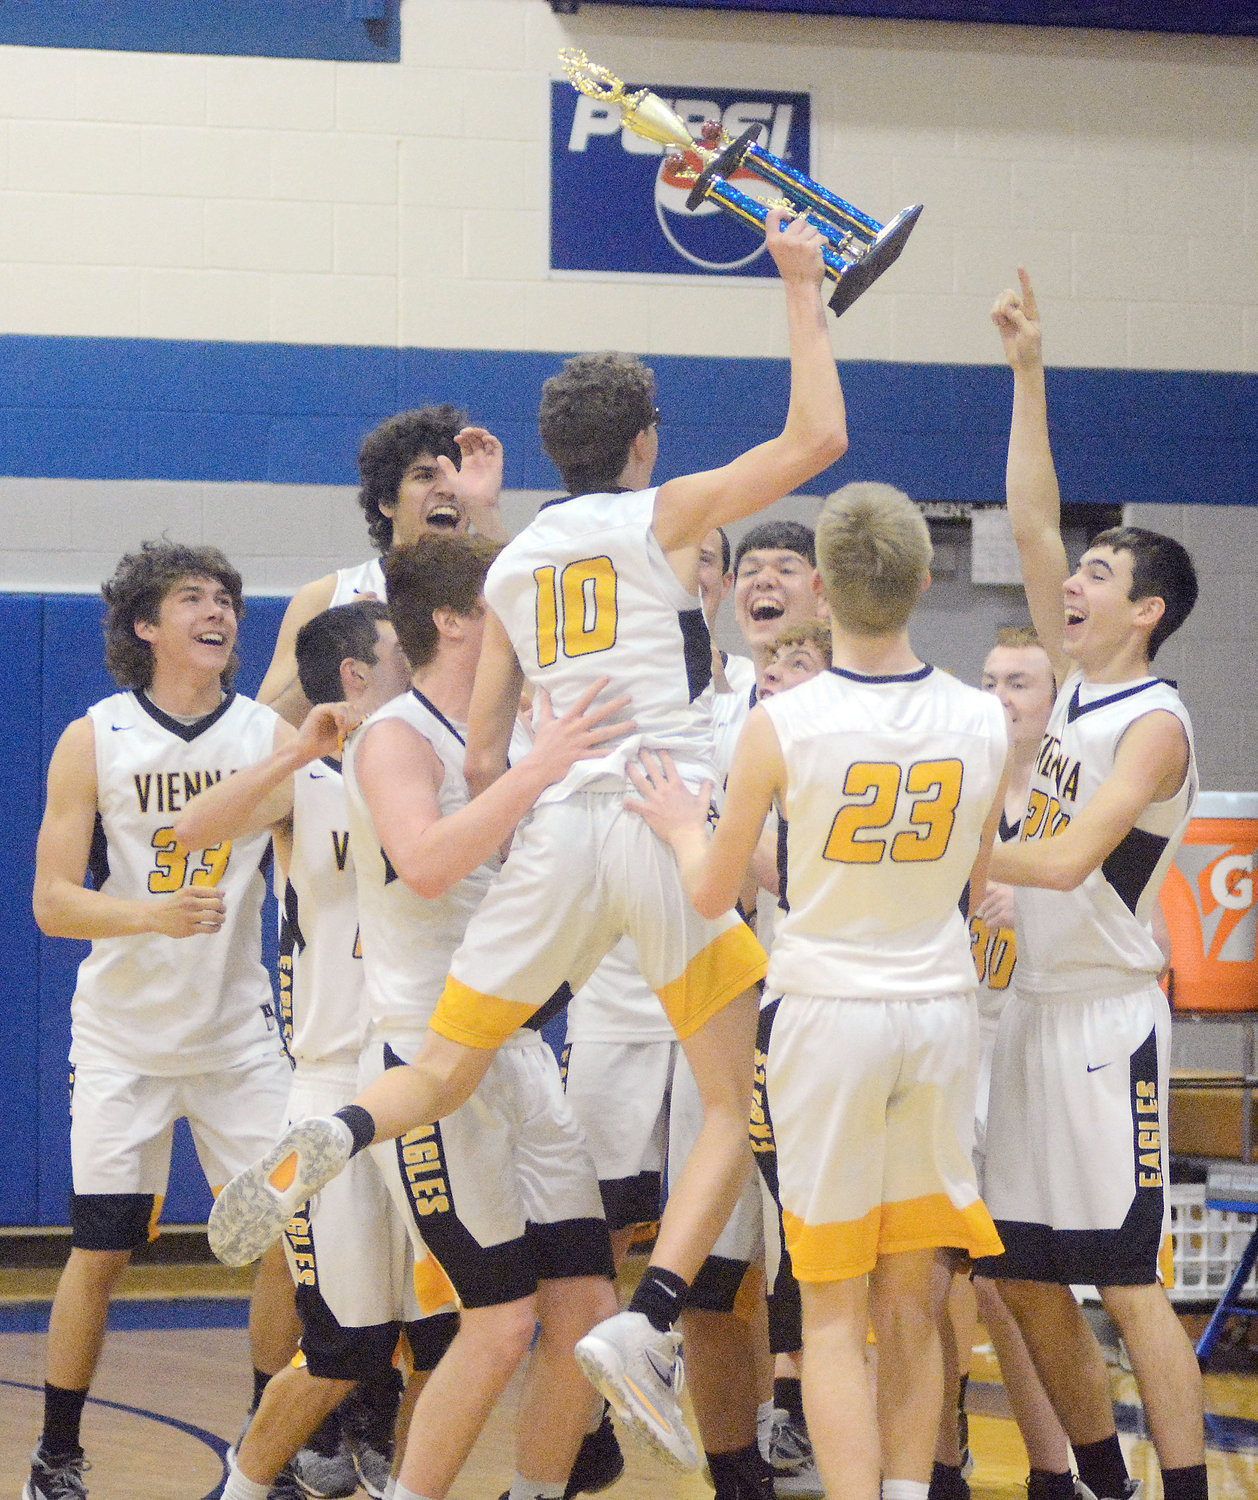 Max Steffen (center) leaps with the championship trophy in hand while celebrating Vienna’s first tournament title in four years.